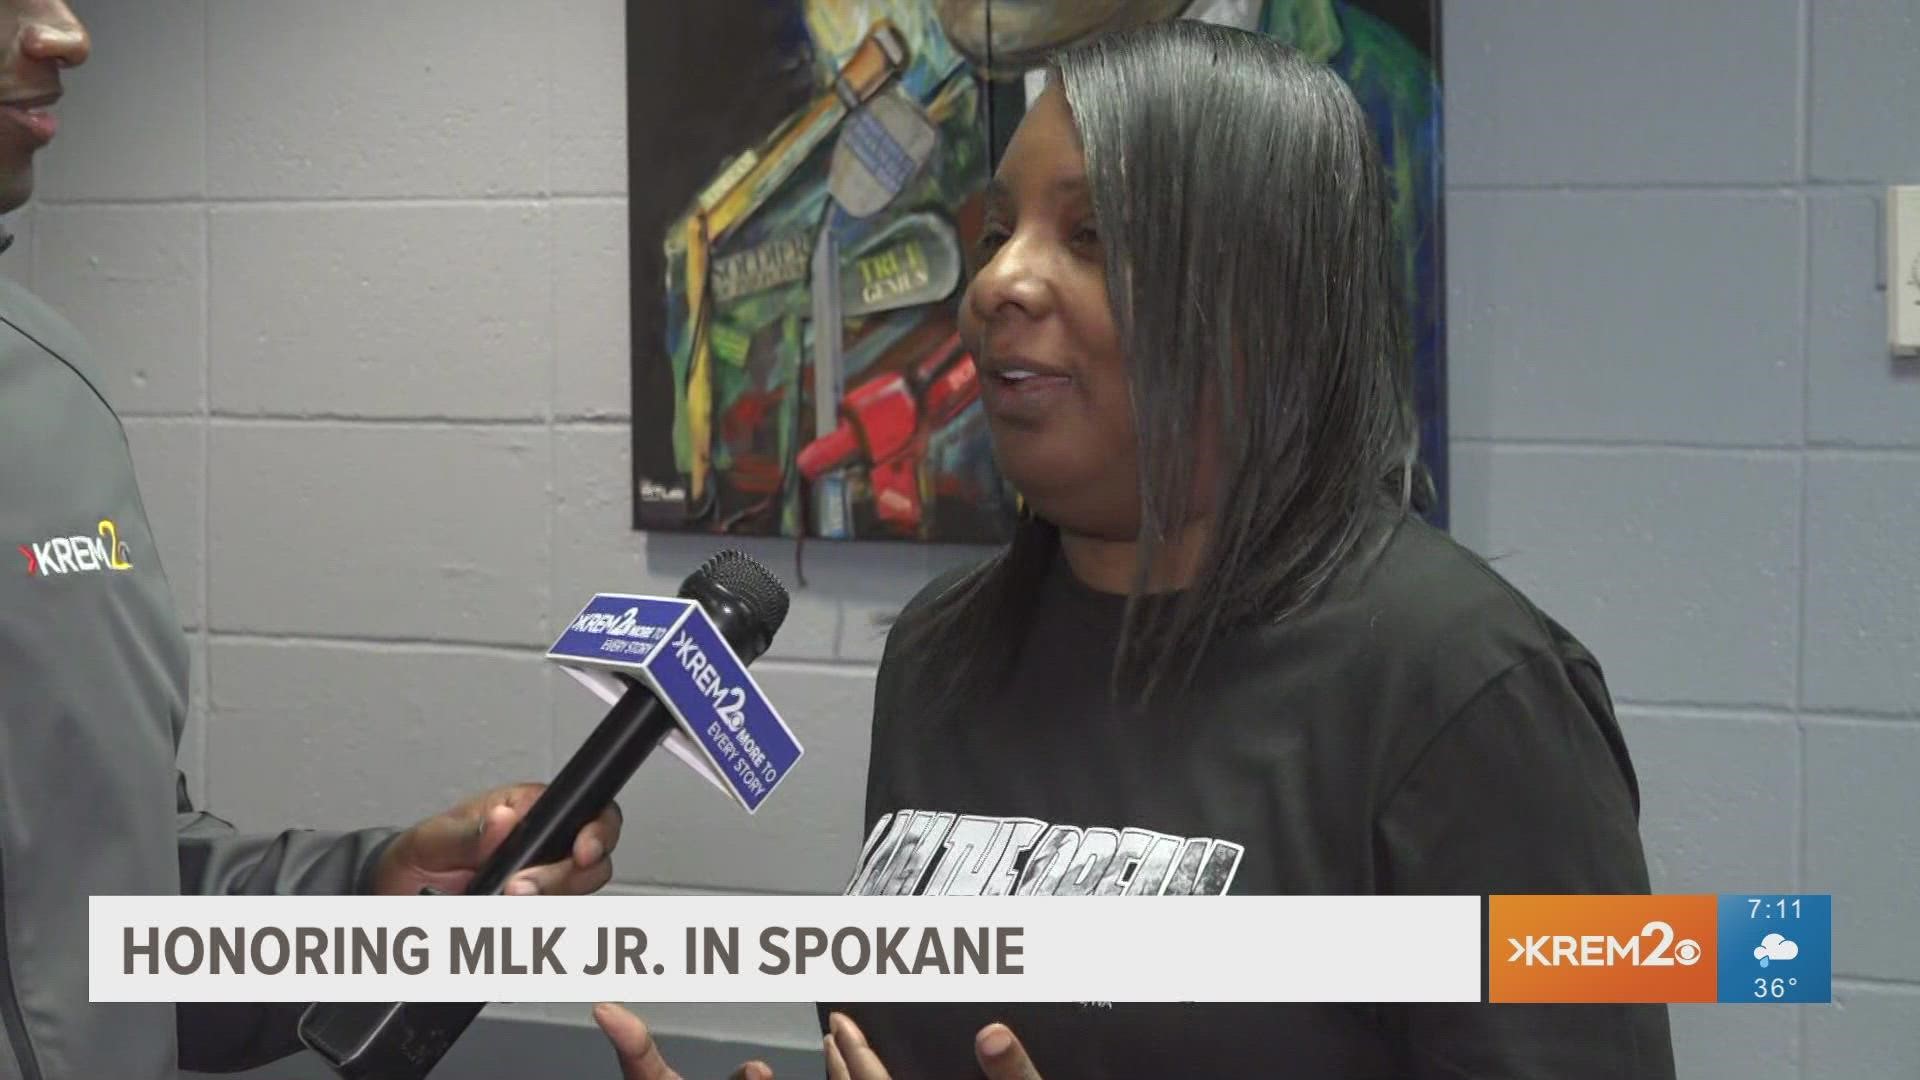 Several events are planned in Spokane today to honor Martin Luther King Jr.